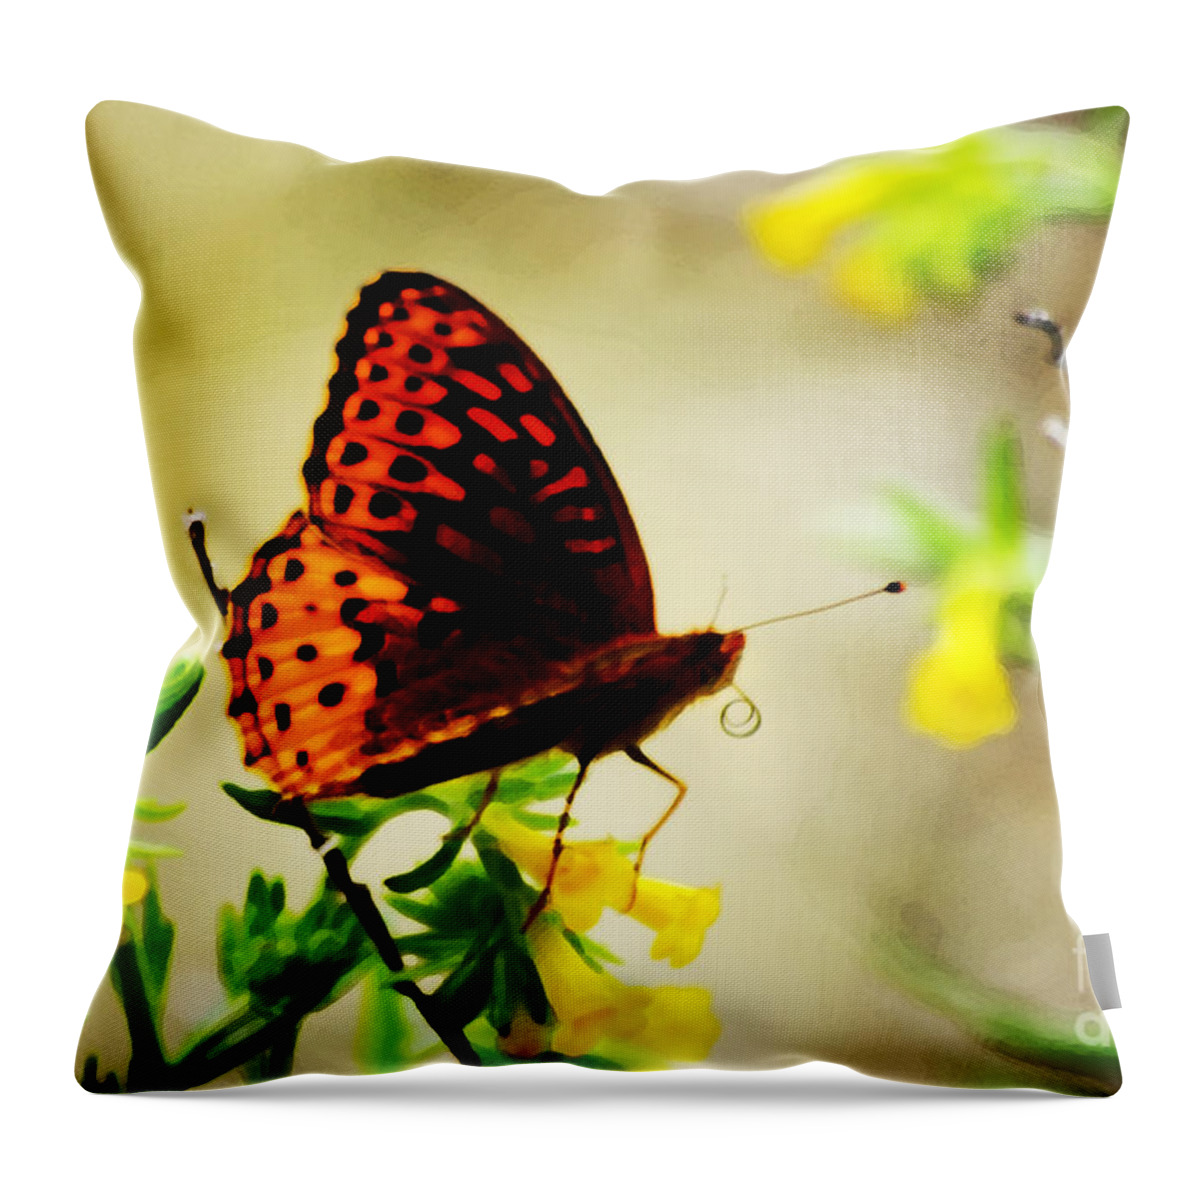 Impressionistic Throw Pillow featuring the photograph I See the Light by Vicki Pelham